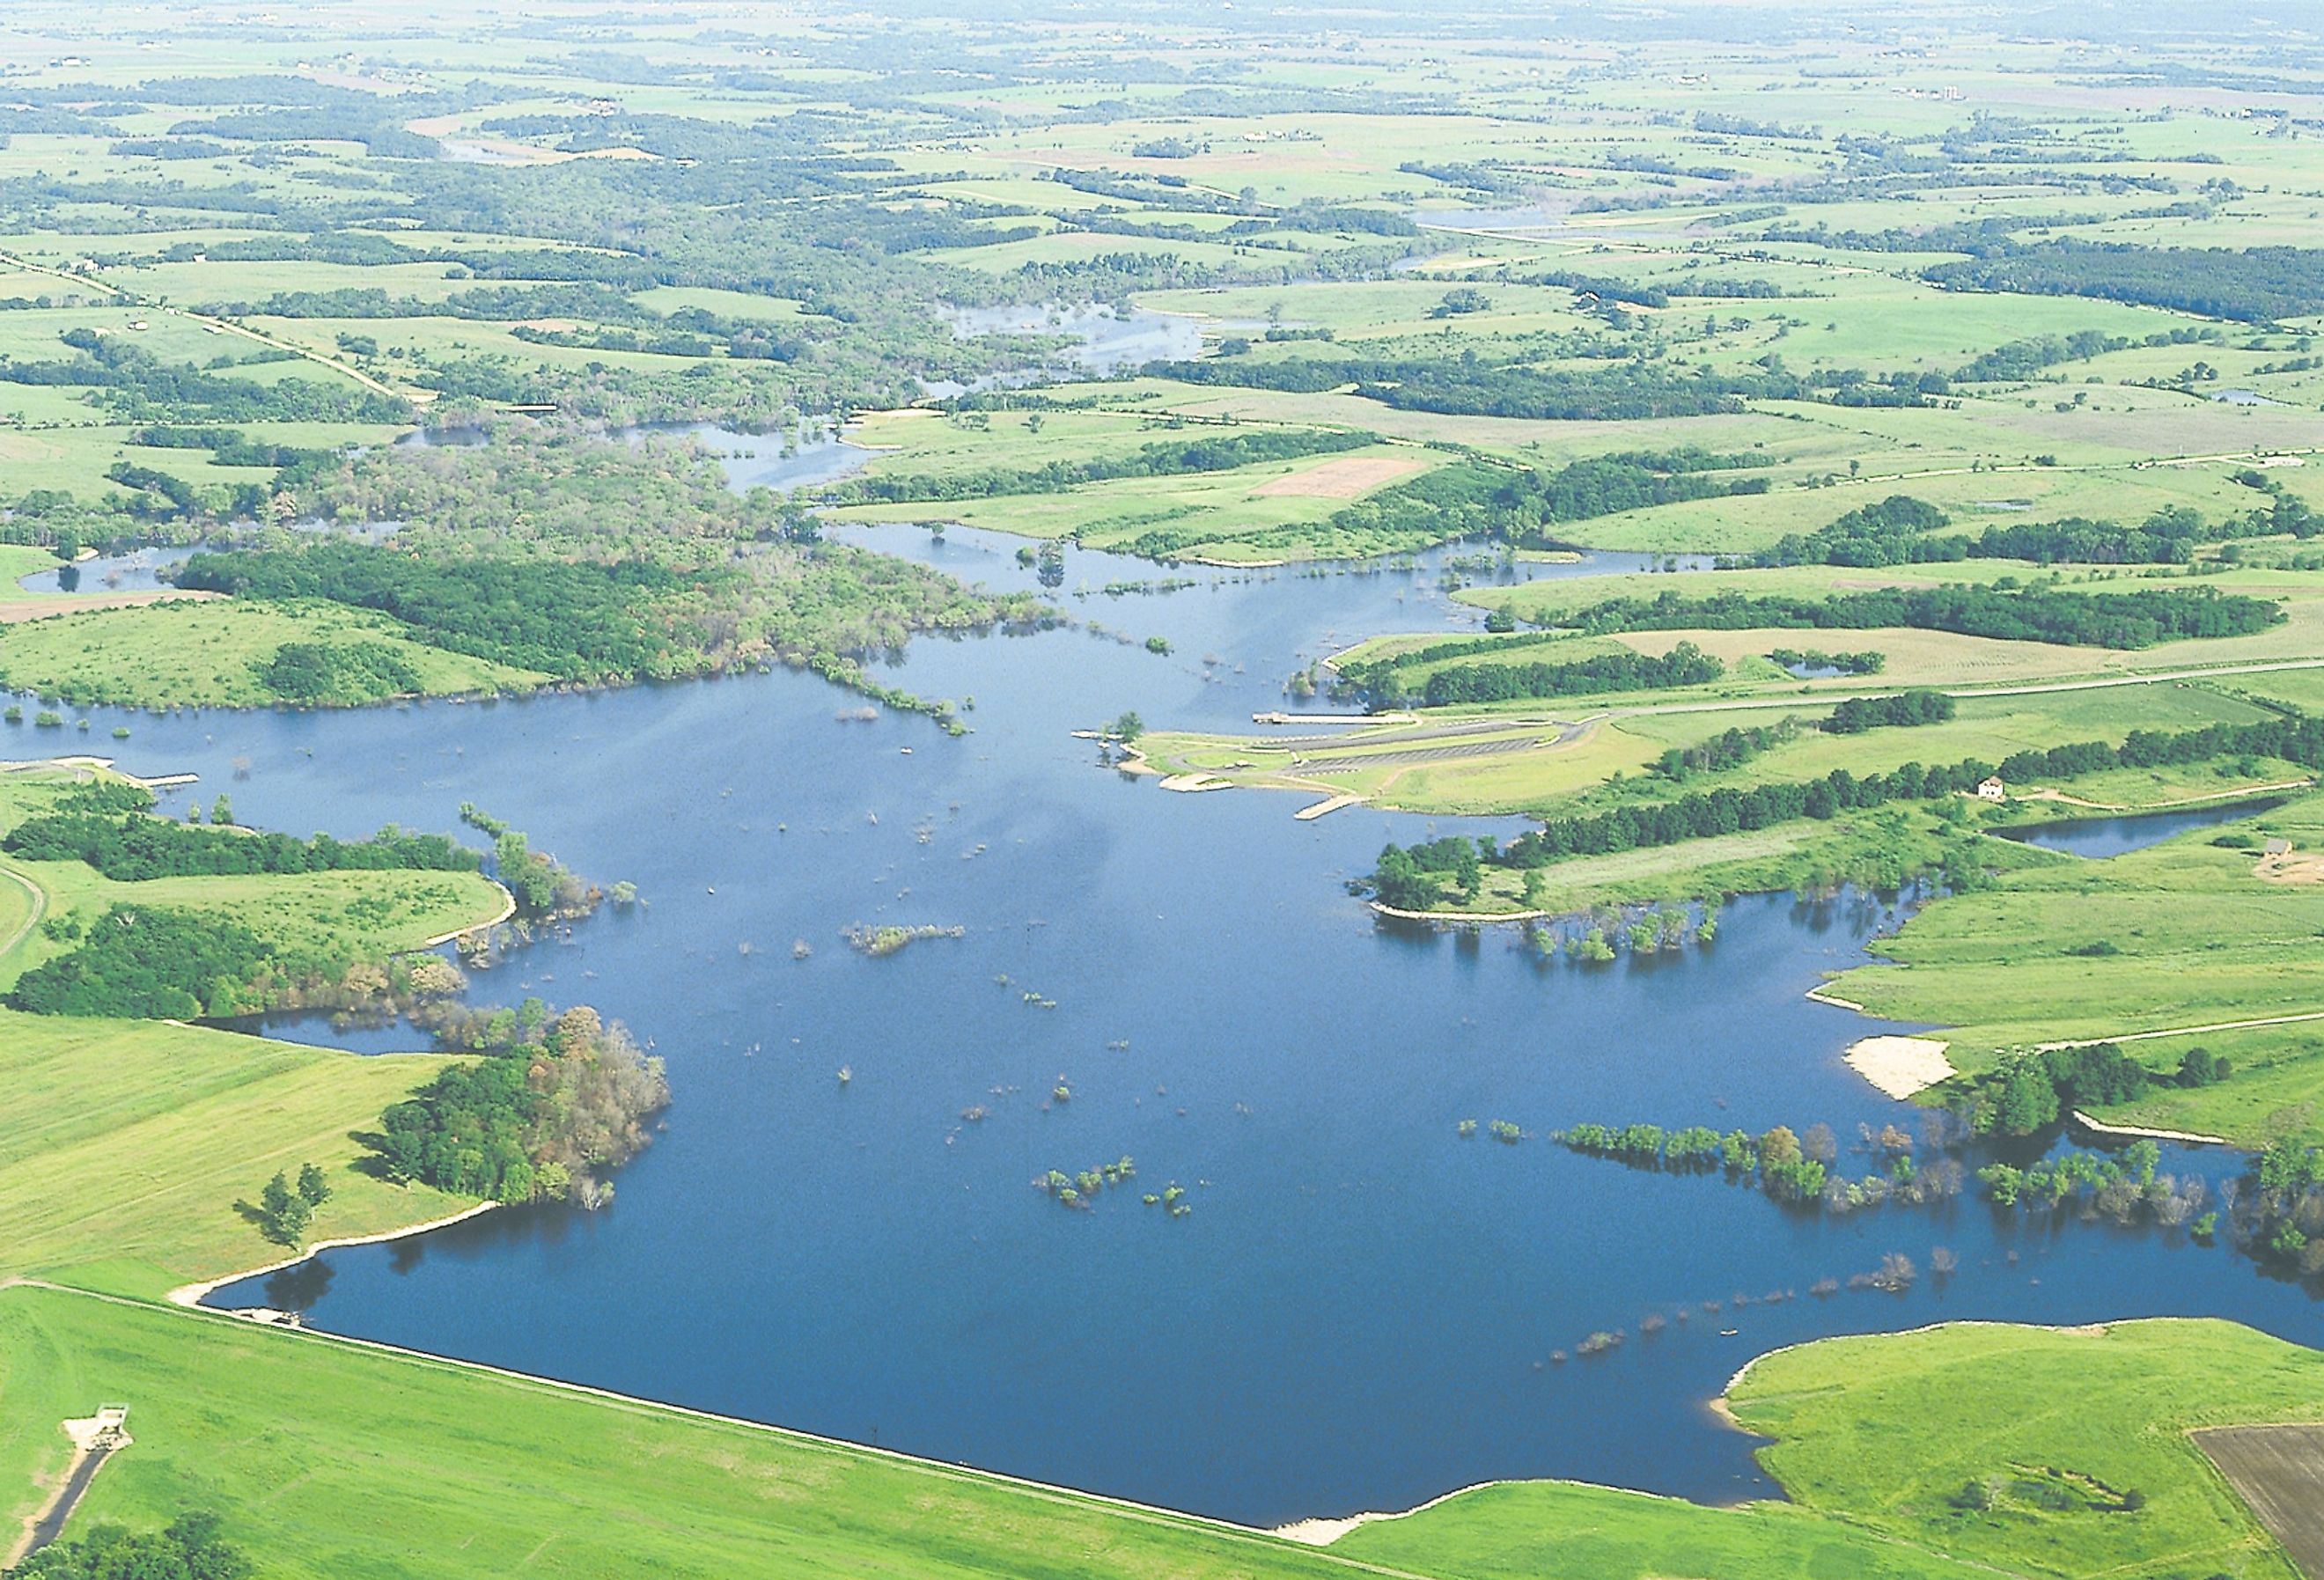 Aerial view of Lake Sugema surrounded by lush grass and trees.